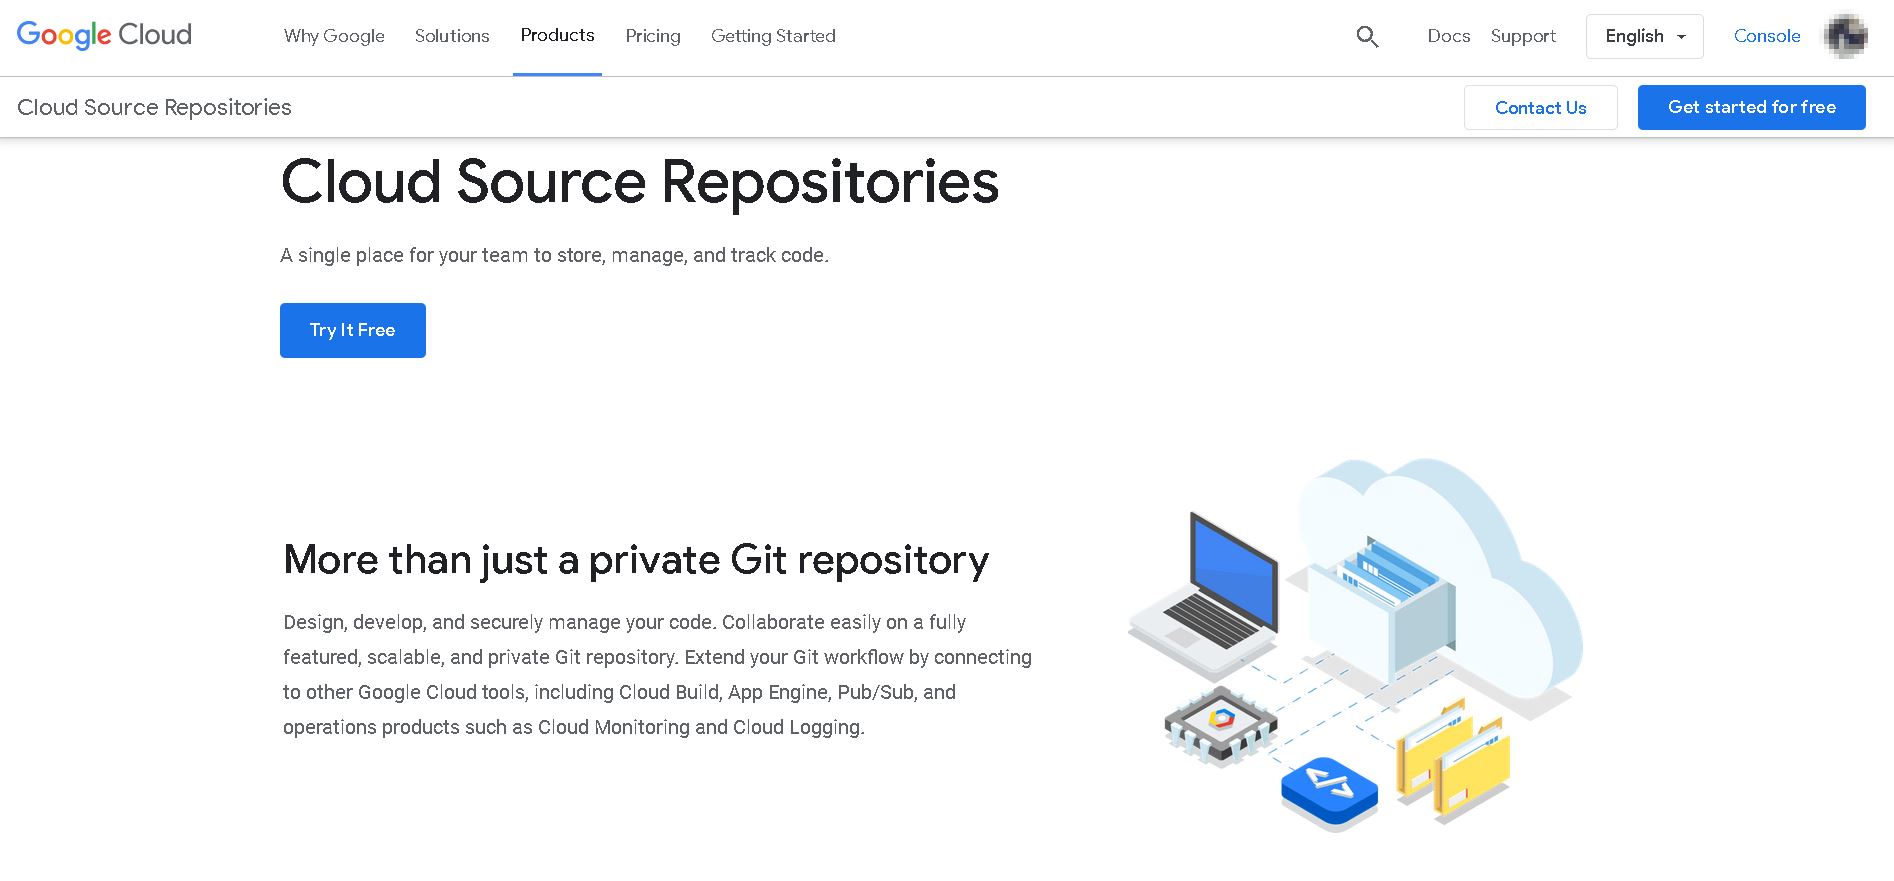 Google Cloud Source Repositories, homepage shown here, is another popular alternative to GitHub.